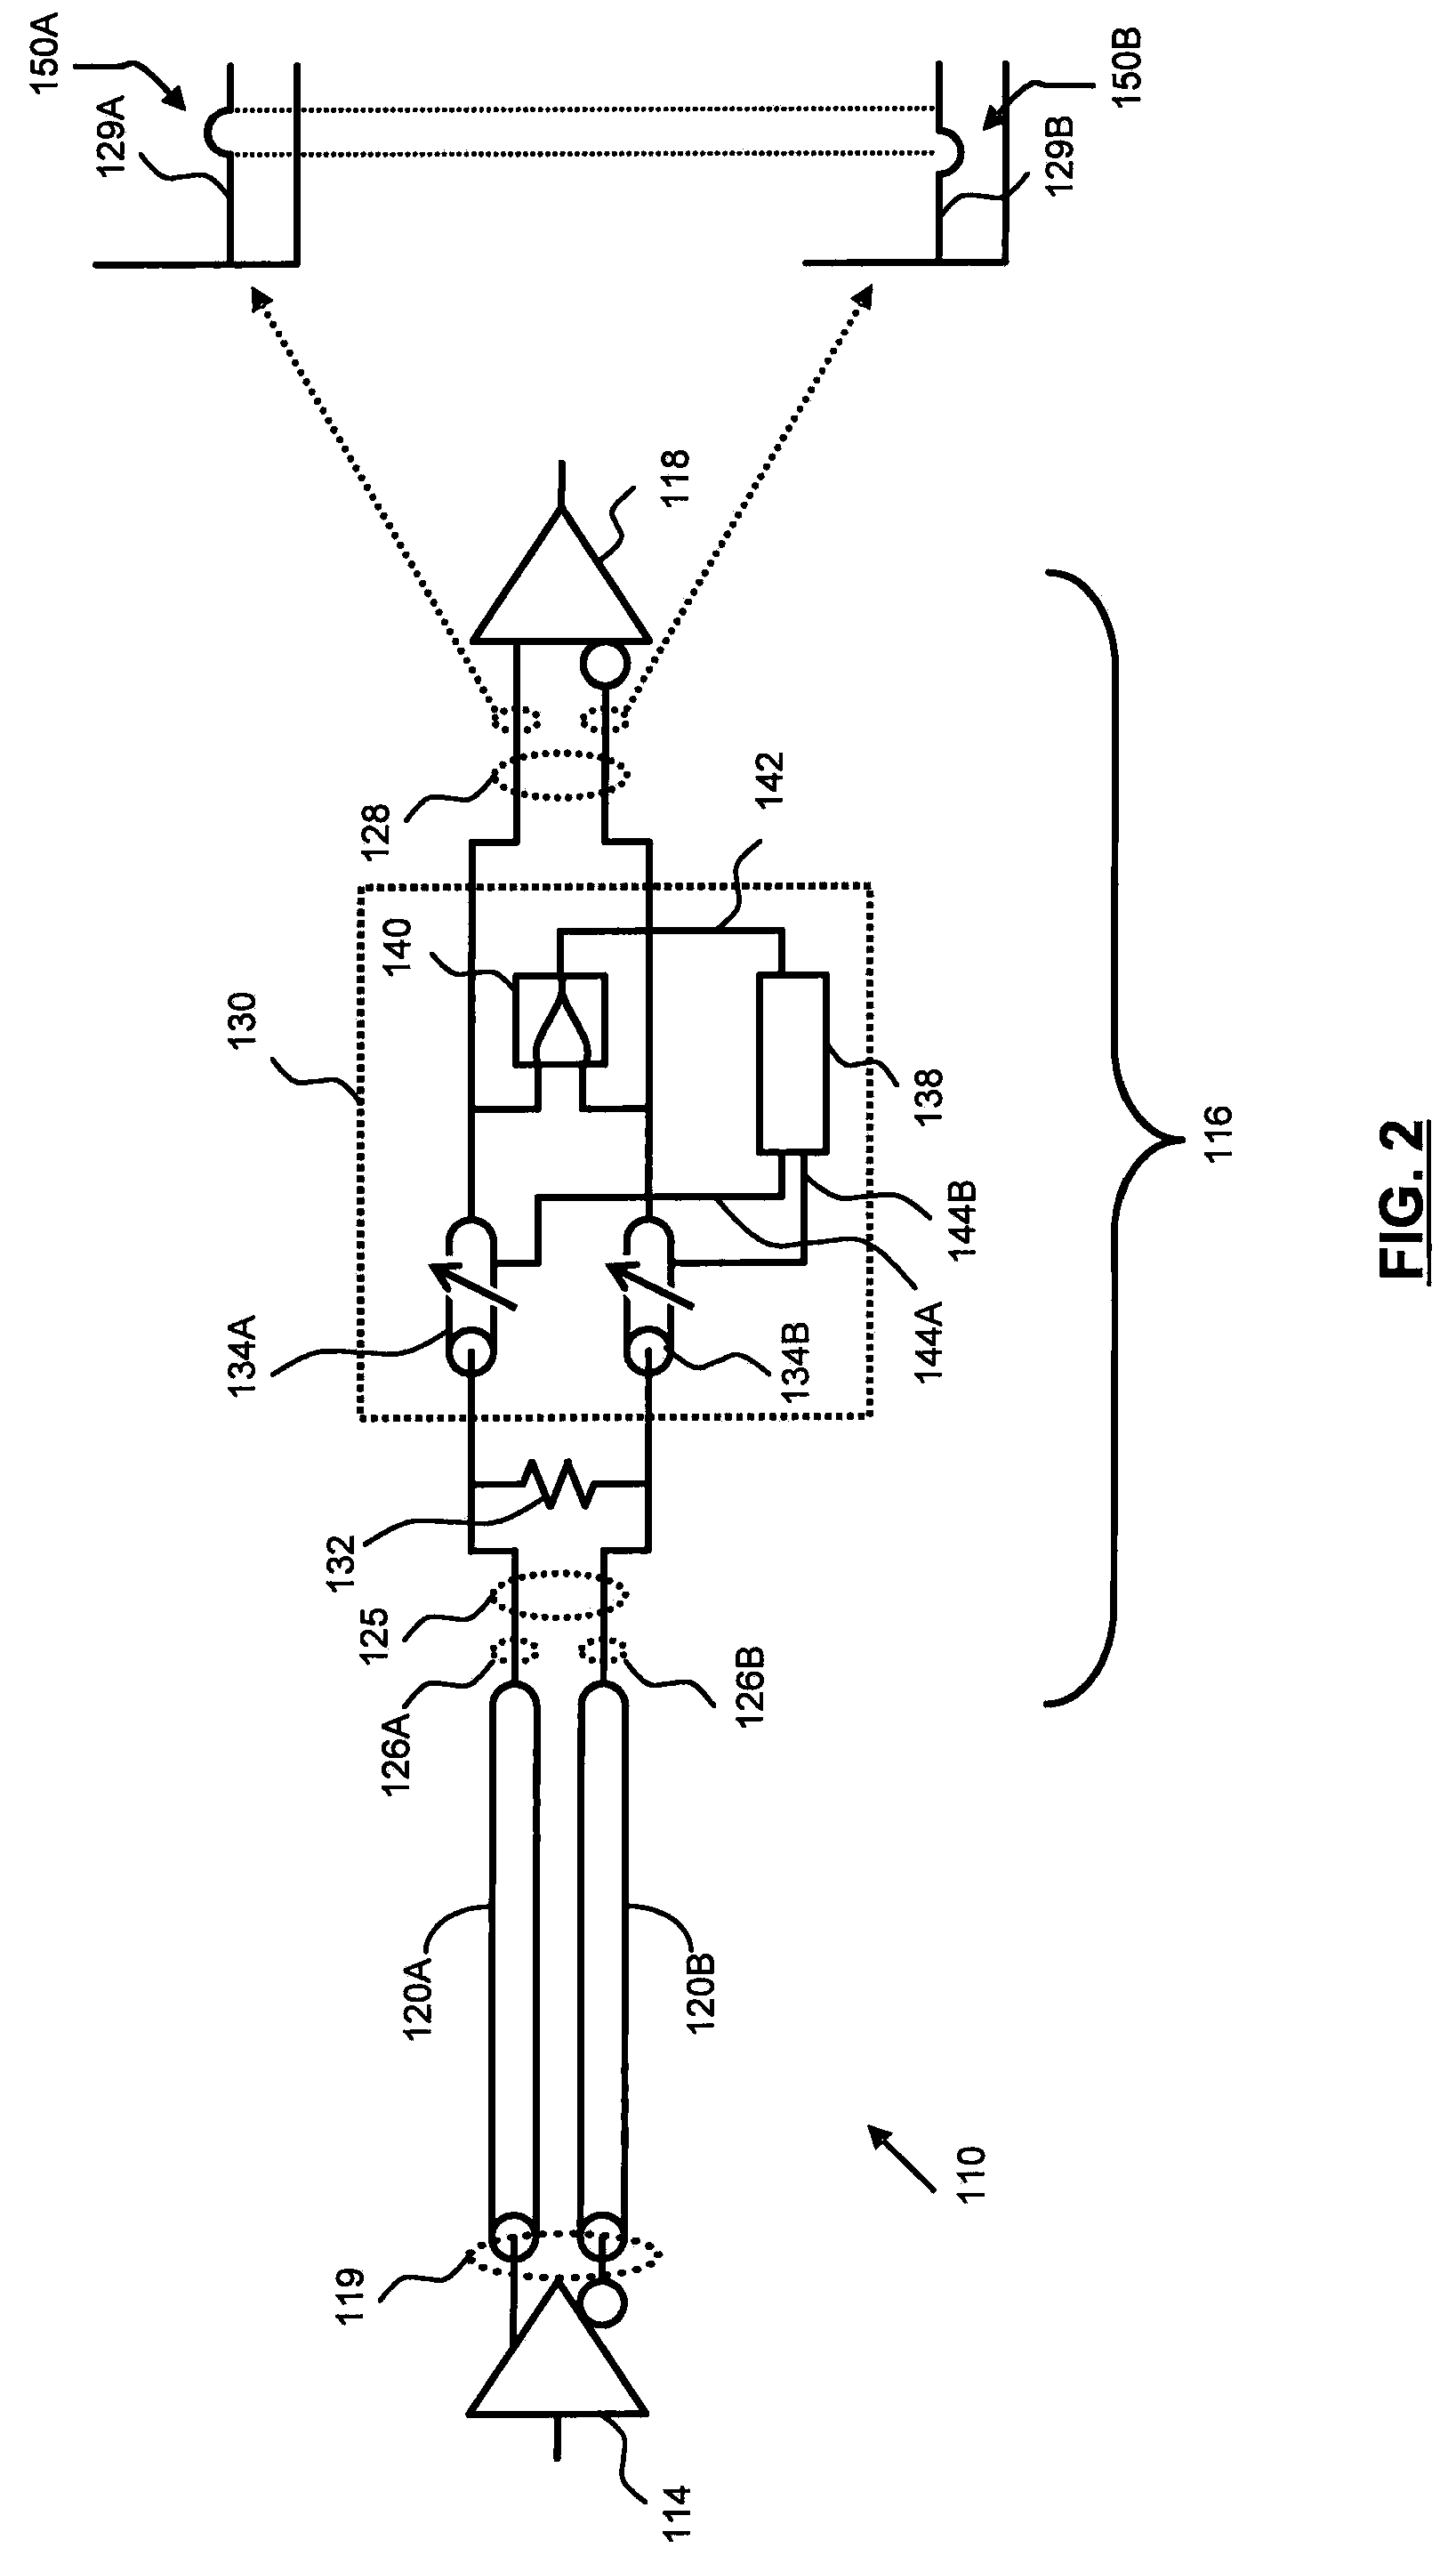 Differential communication link with skew compensation circuit